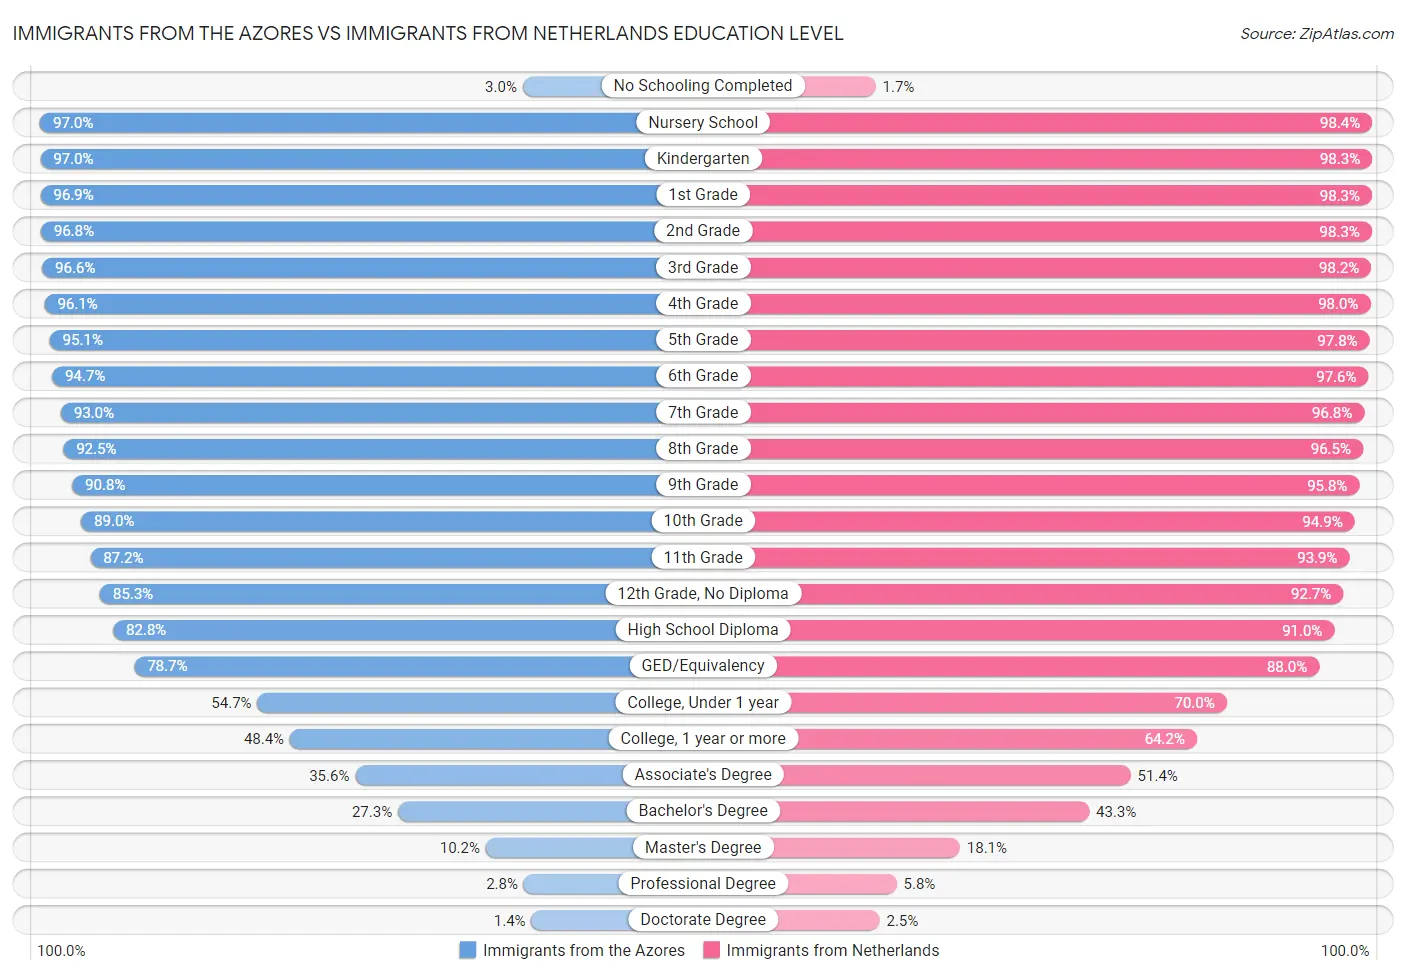 Immigrants from the Azores vs Immigrants from Netherlands Education Level